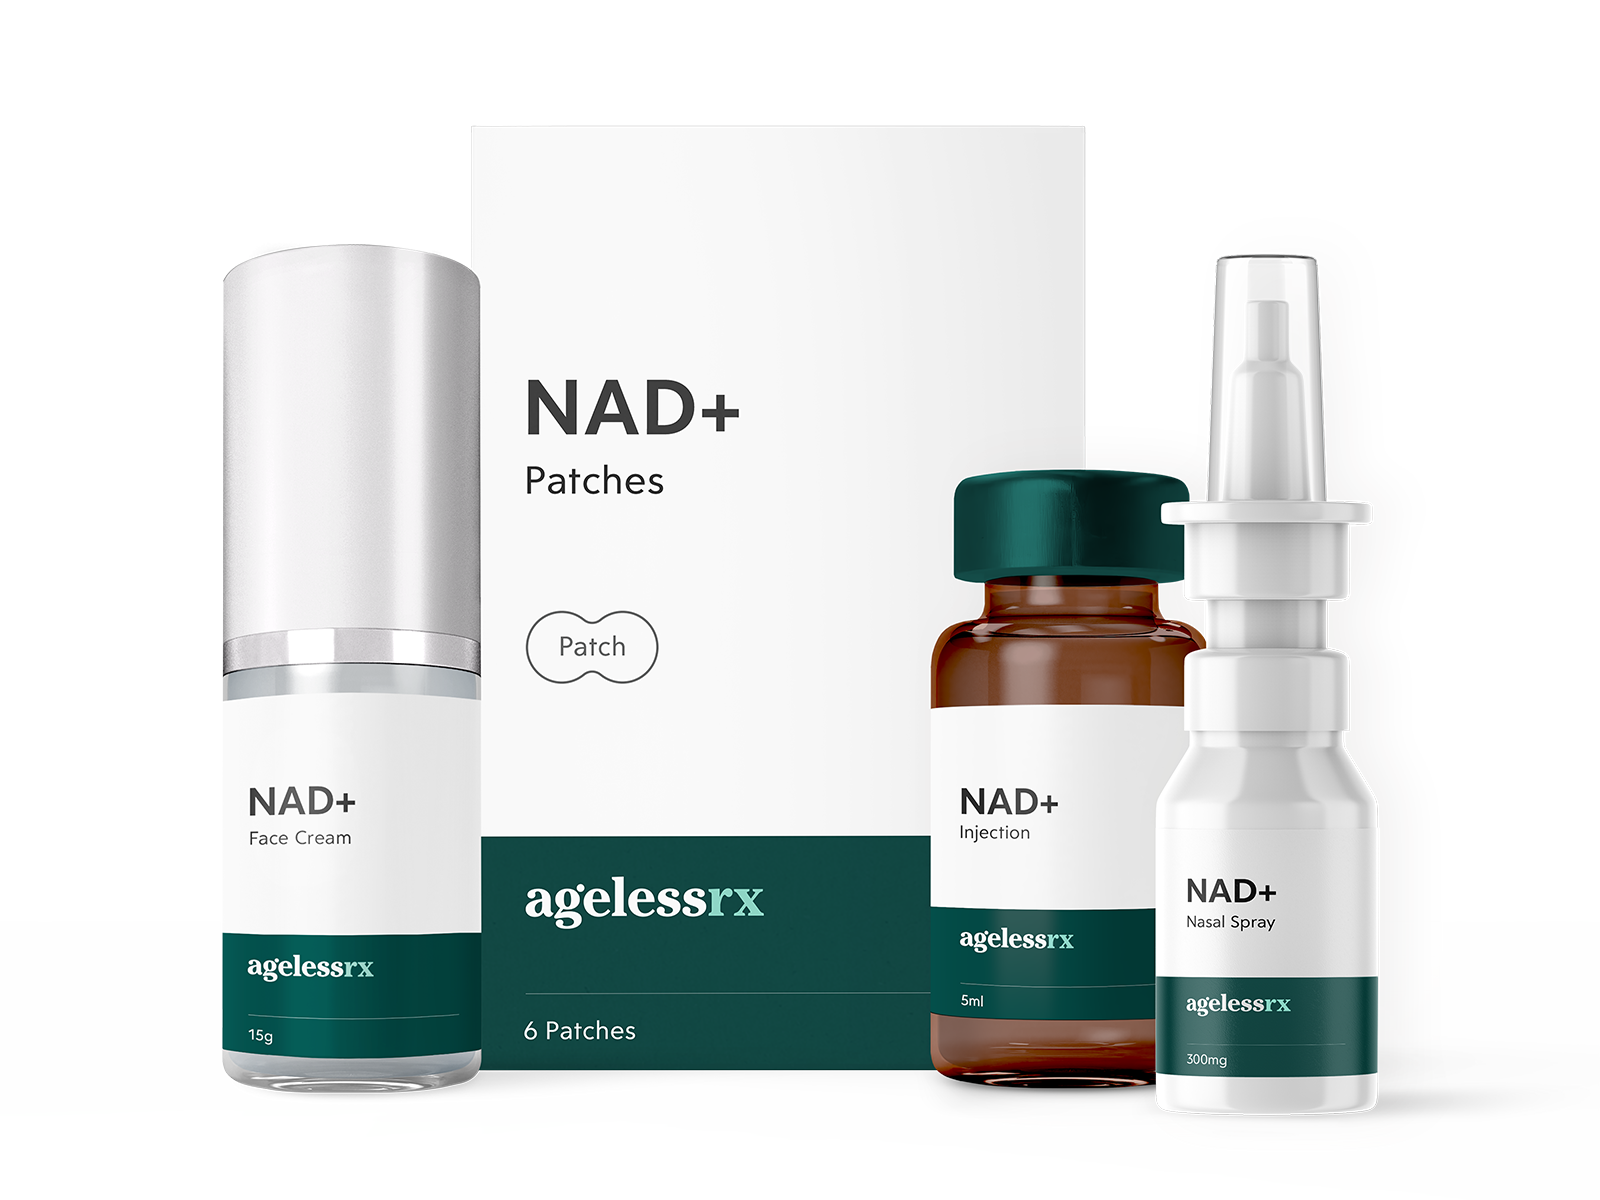 NAD+ product suite including NAD+ face cream pump bottle, patch box, injection vial, and nasal spray